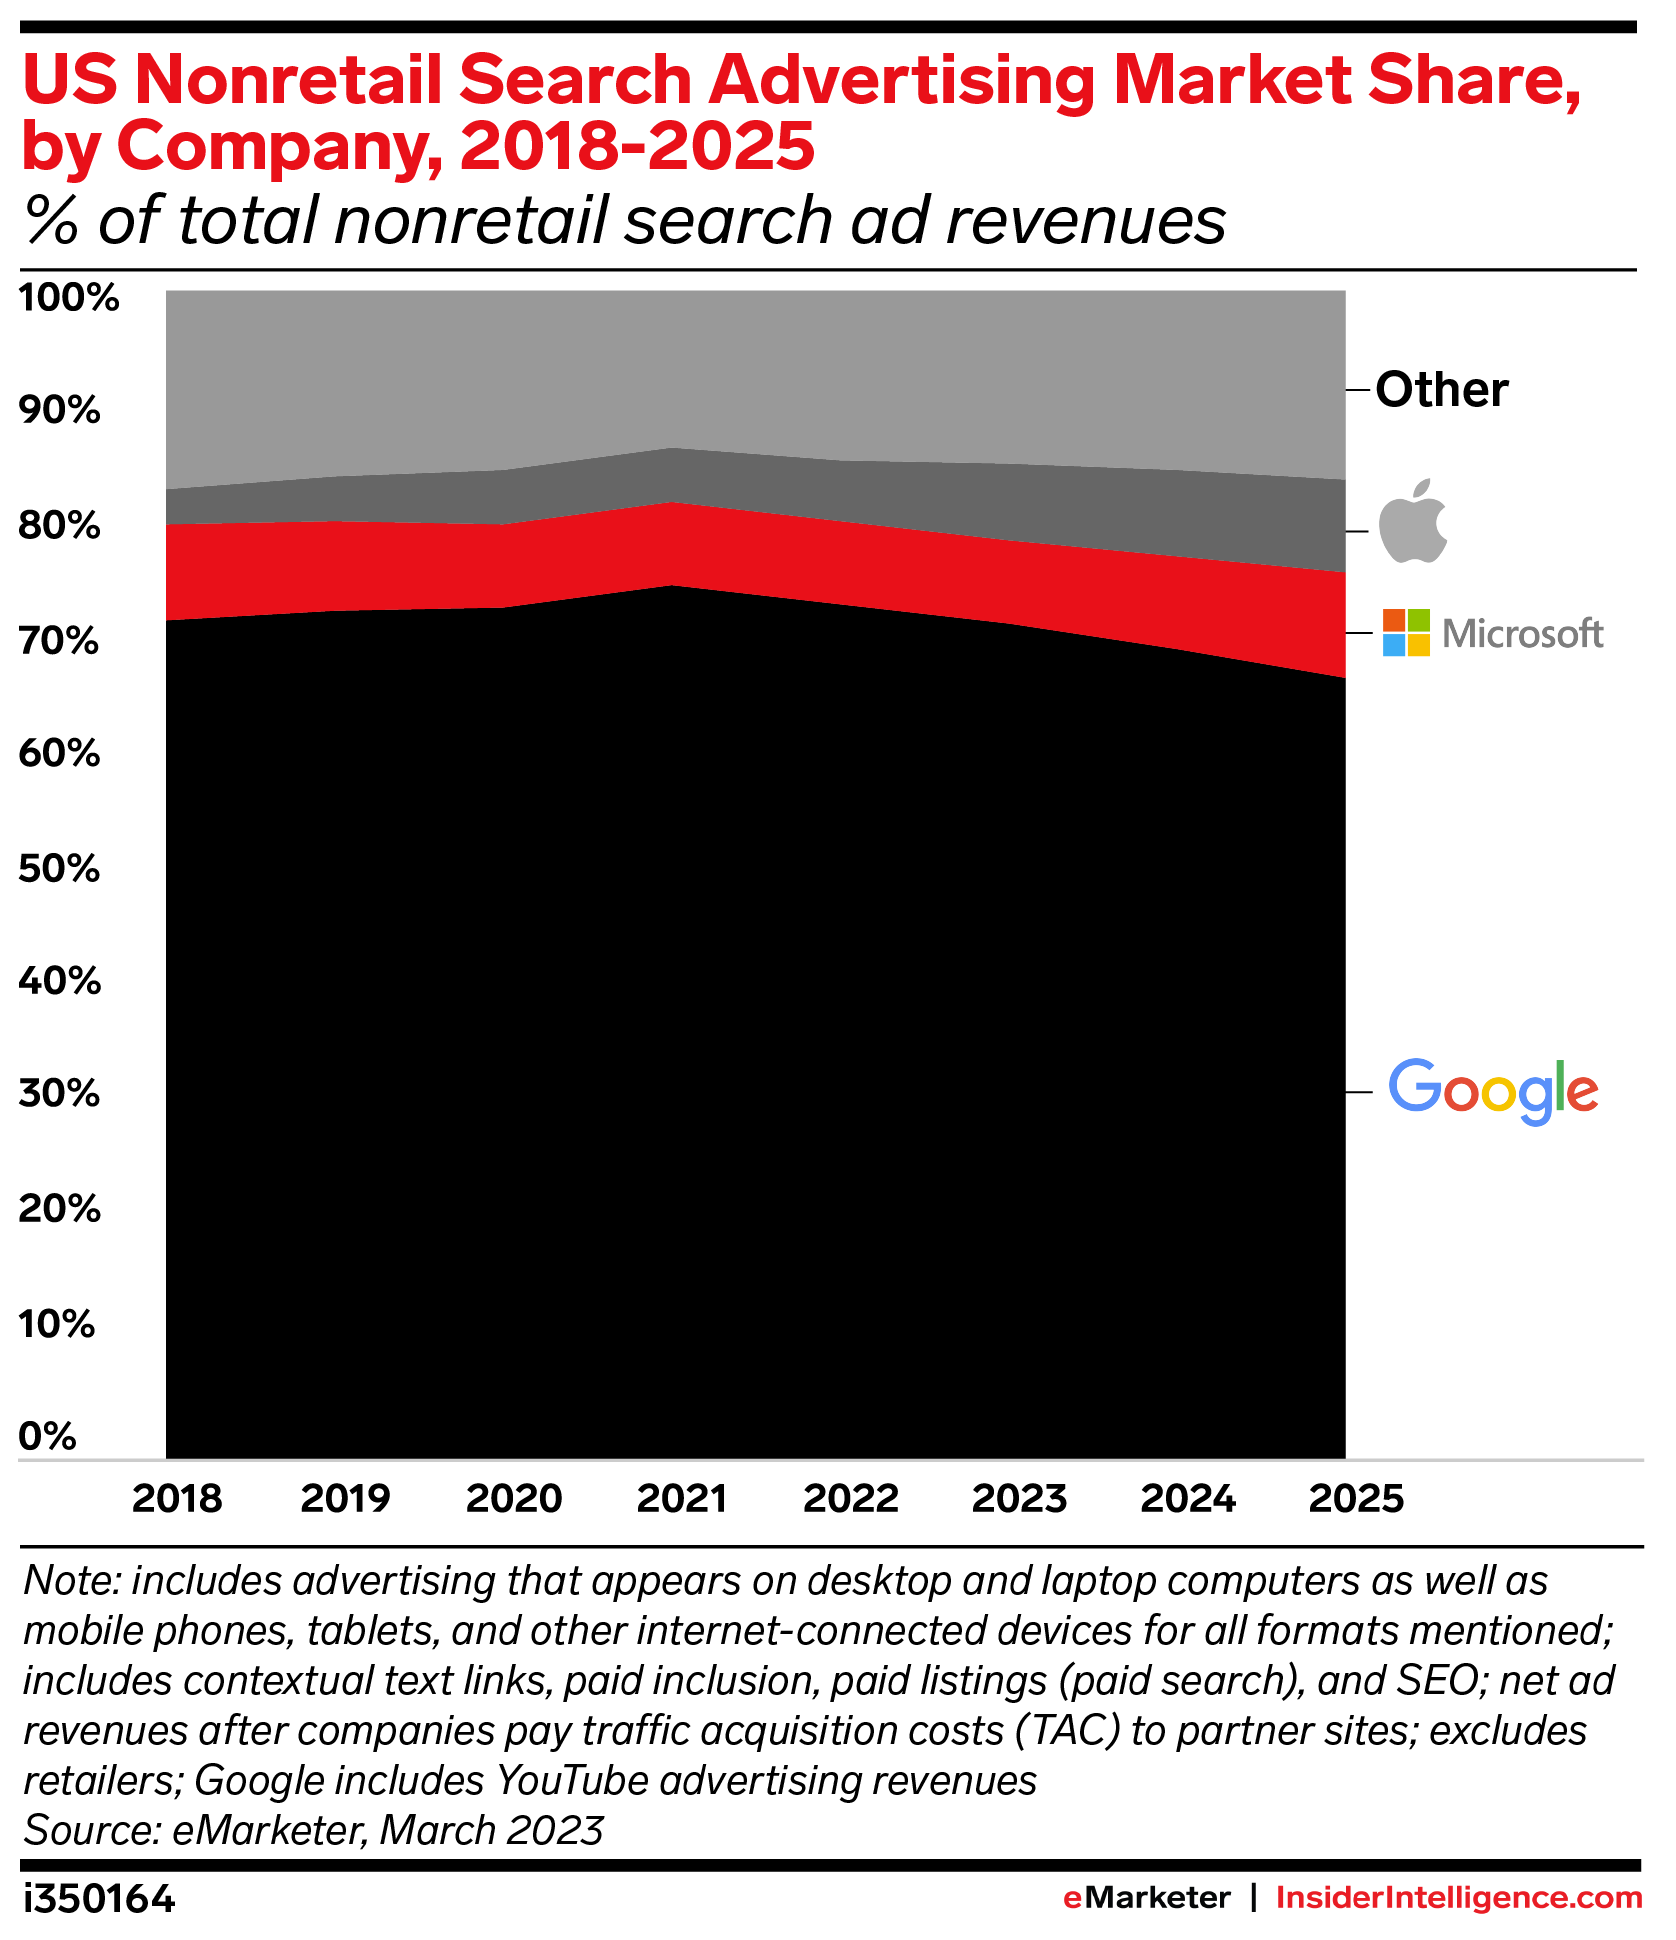 US Nonretail Search Advertising Market Share, by Company, 2018-2025 (% of total nonretail search ad revenues)